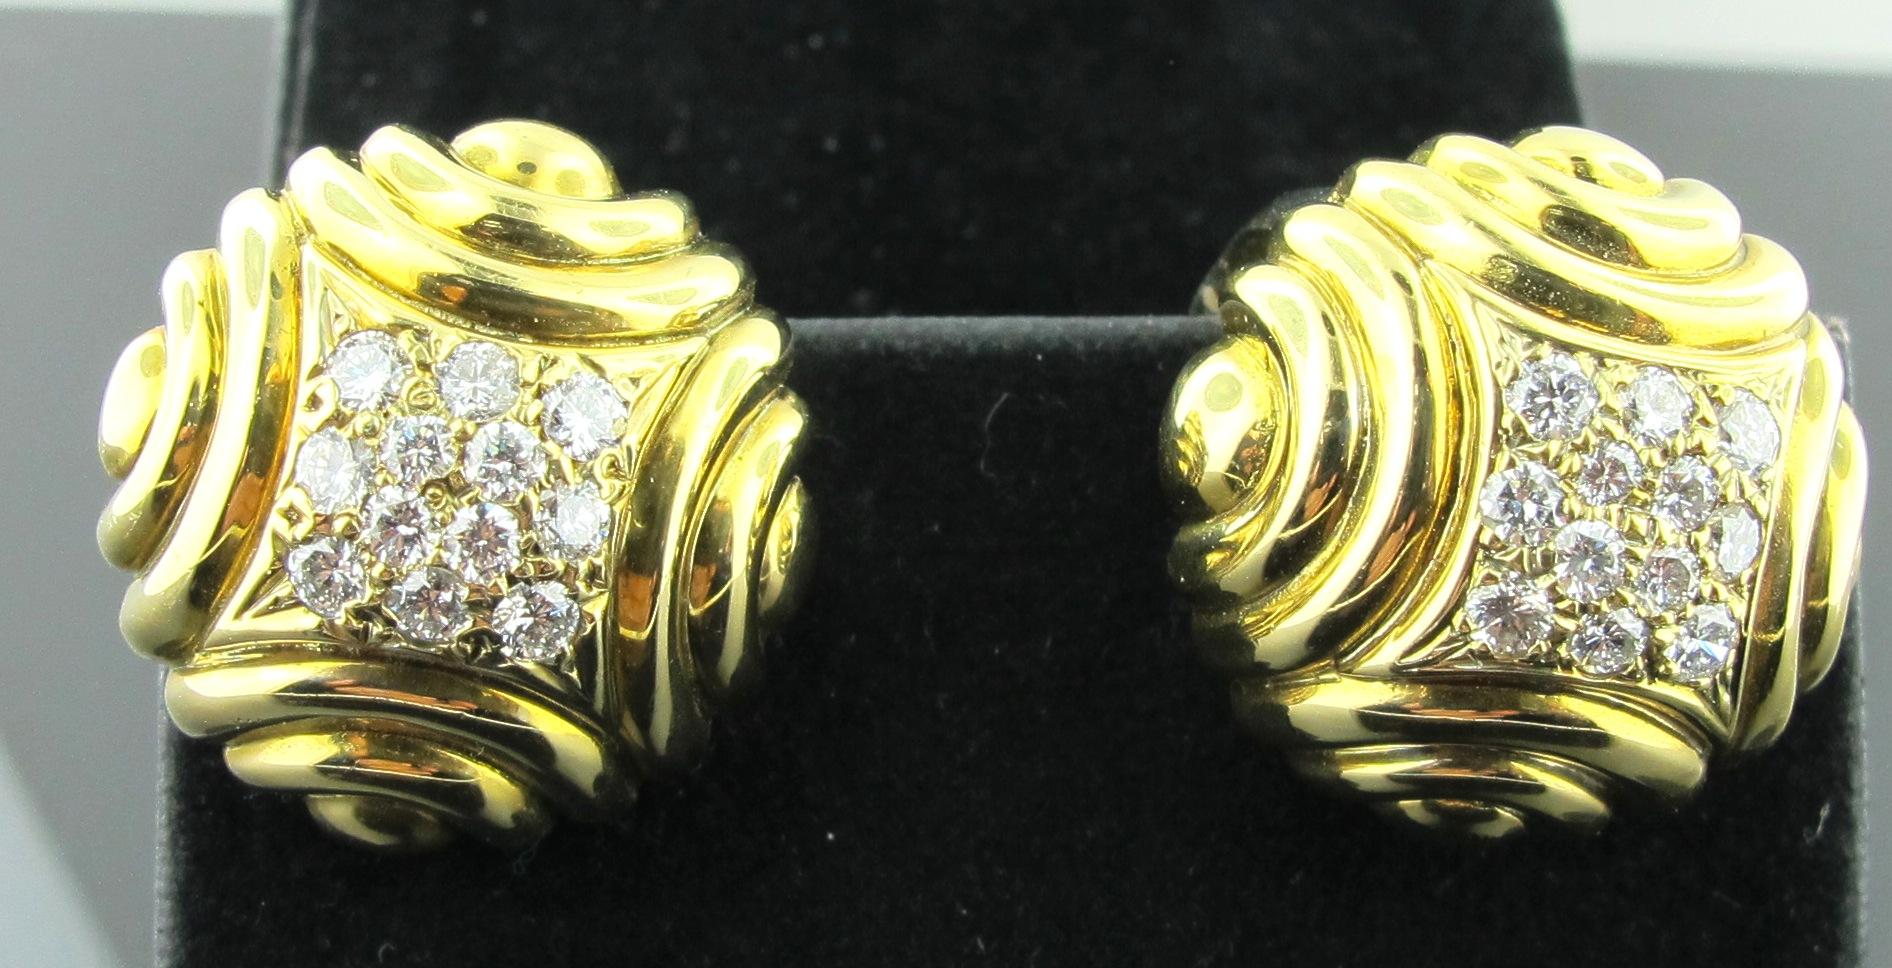 Set in 18 karat yellow gold are 24 round brilliant cut diamonds, 12 diamonds in each earring.  The diamond weight is 0.75 total.  Color is G, Clarity is VS.  23 grams of gold in a nice swirl design. French Clips. 